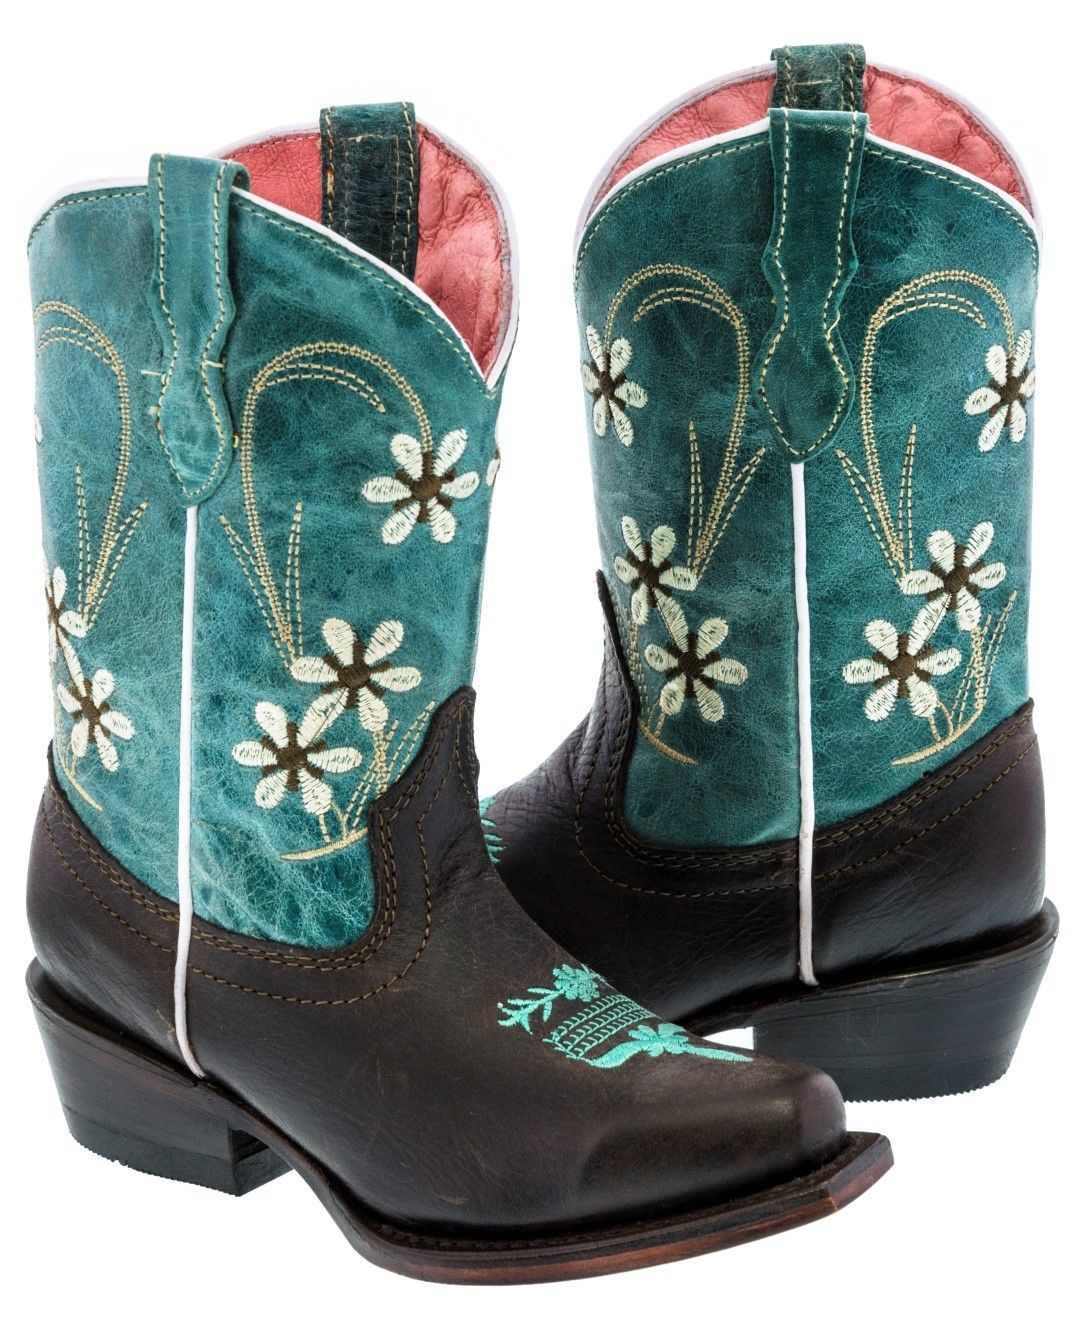 Primary image for Girls Teal Dark Brown Flower Embroidered Cowgirl Leather Boots Kids Snip Toe